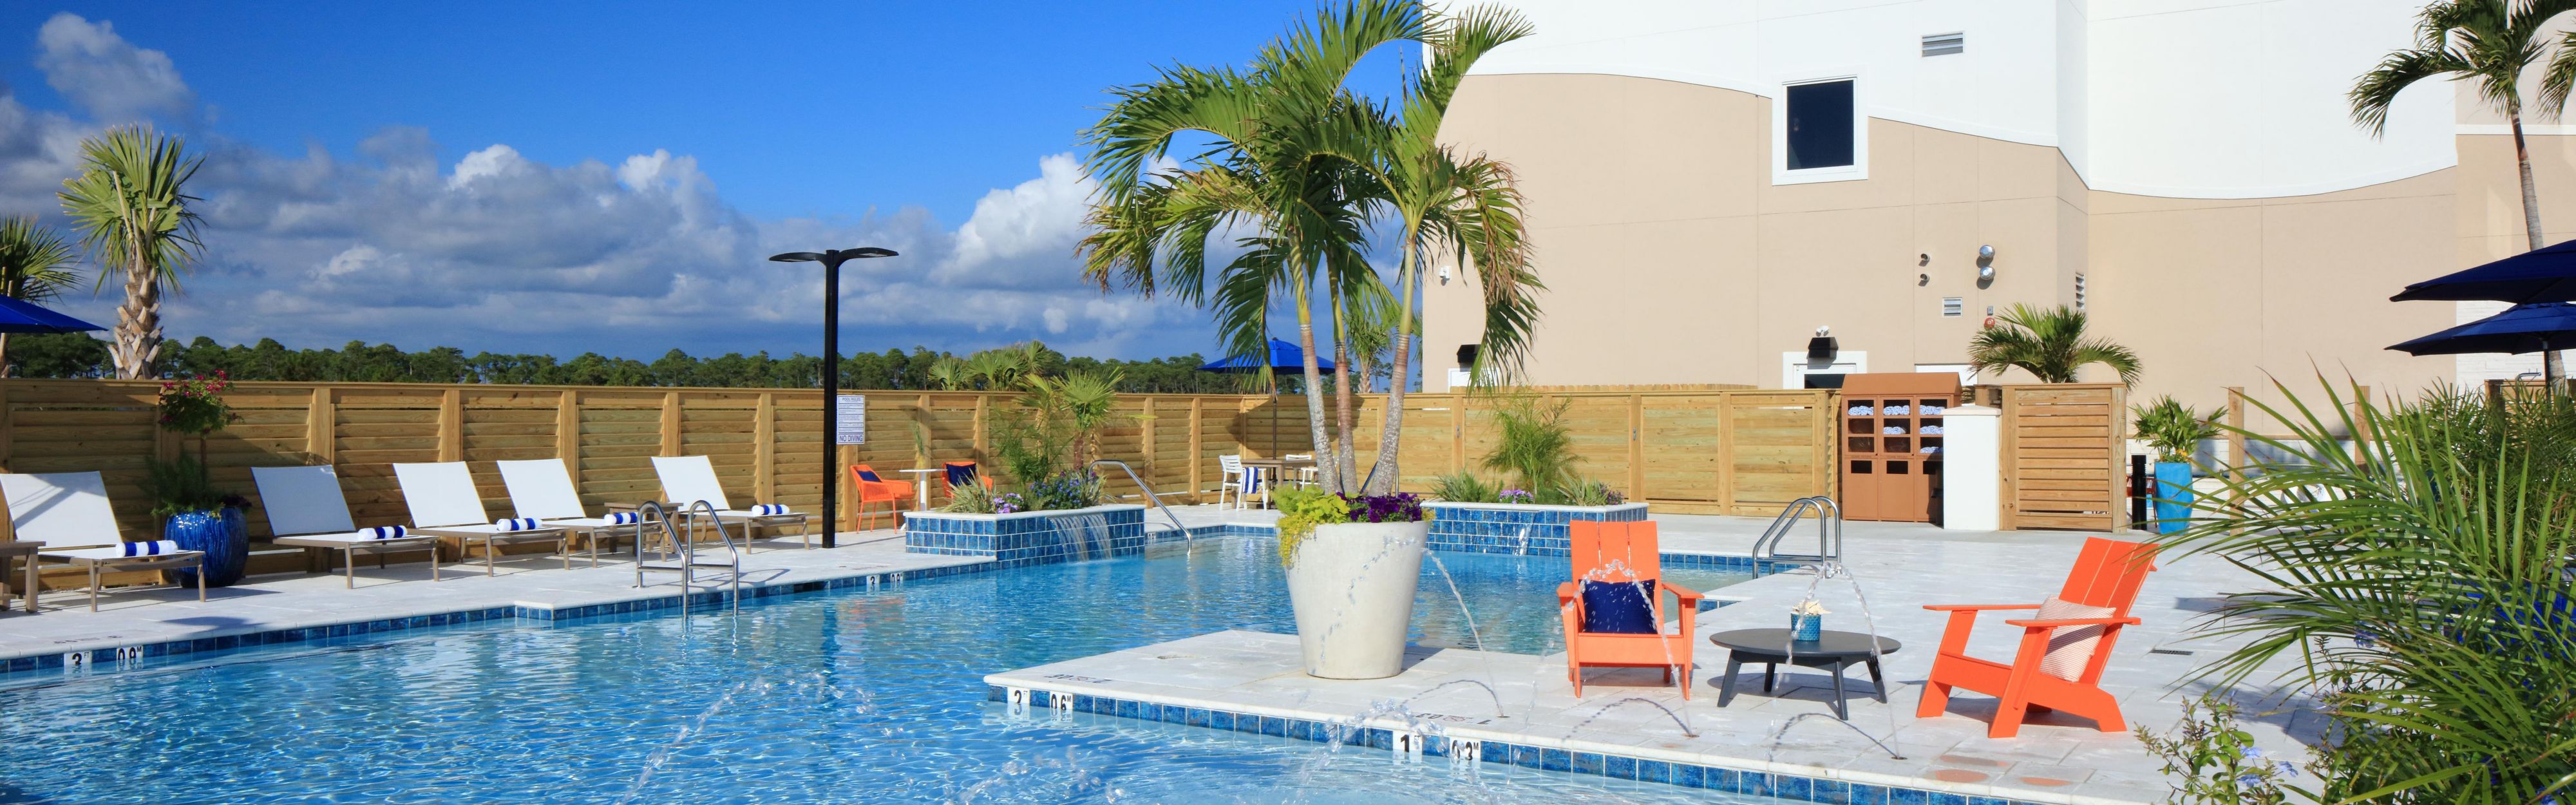 Take a dip in our large outdoor pool